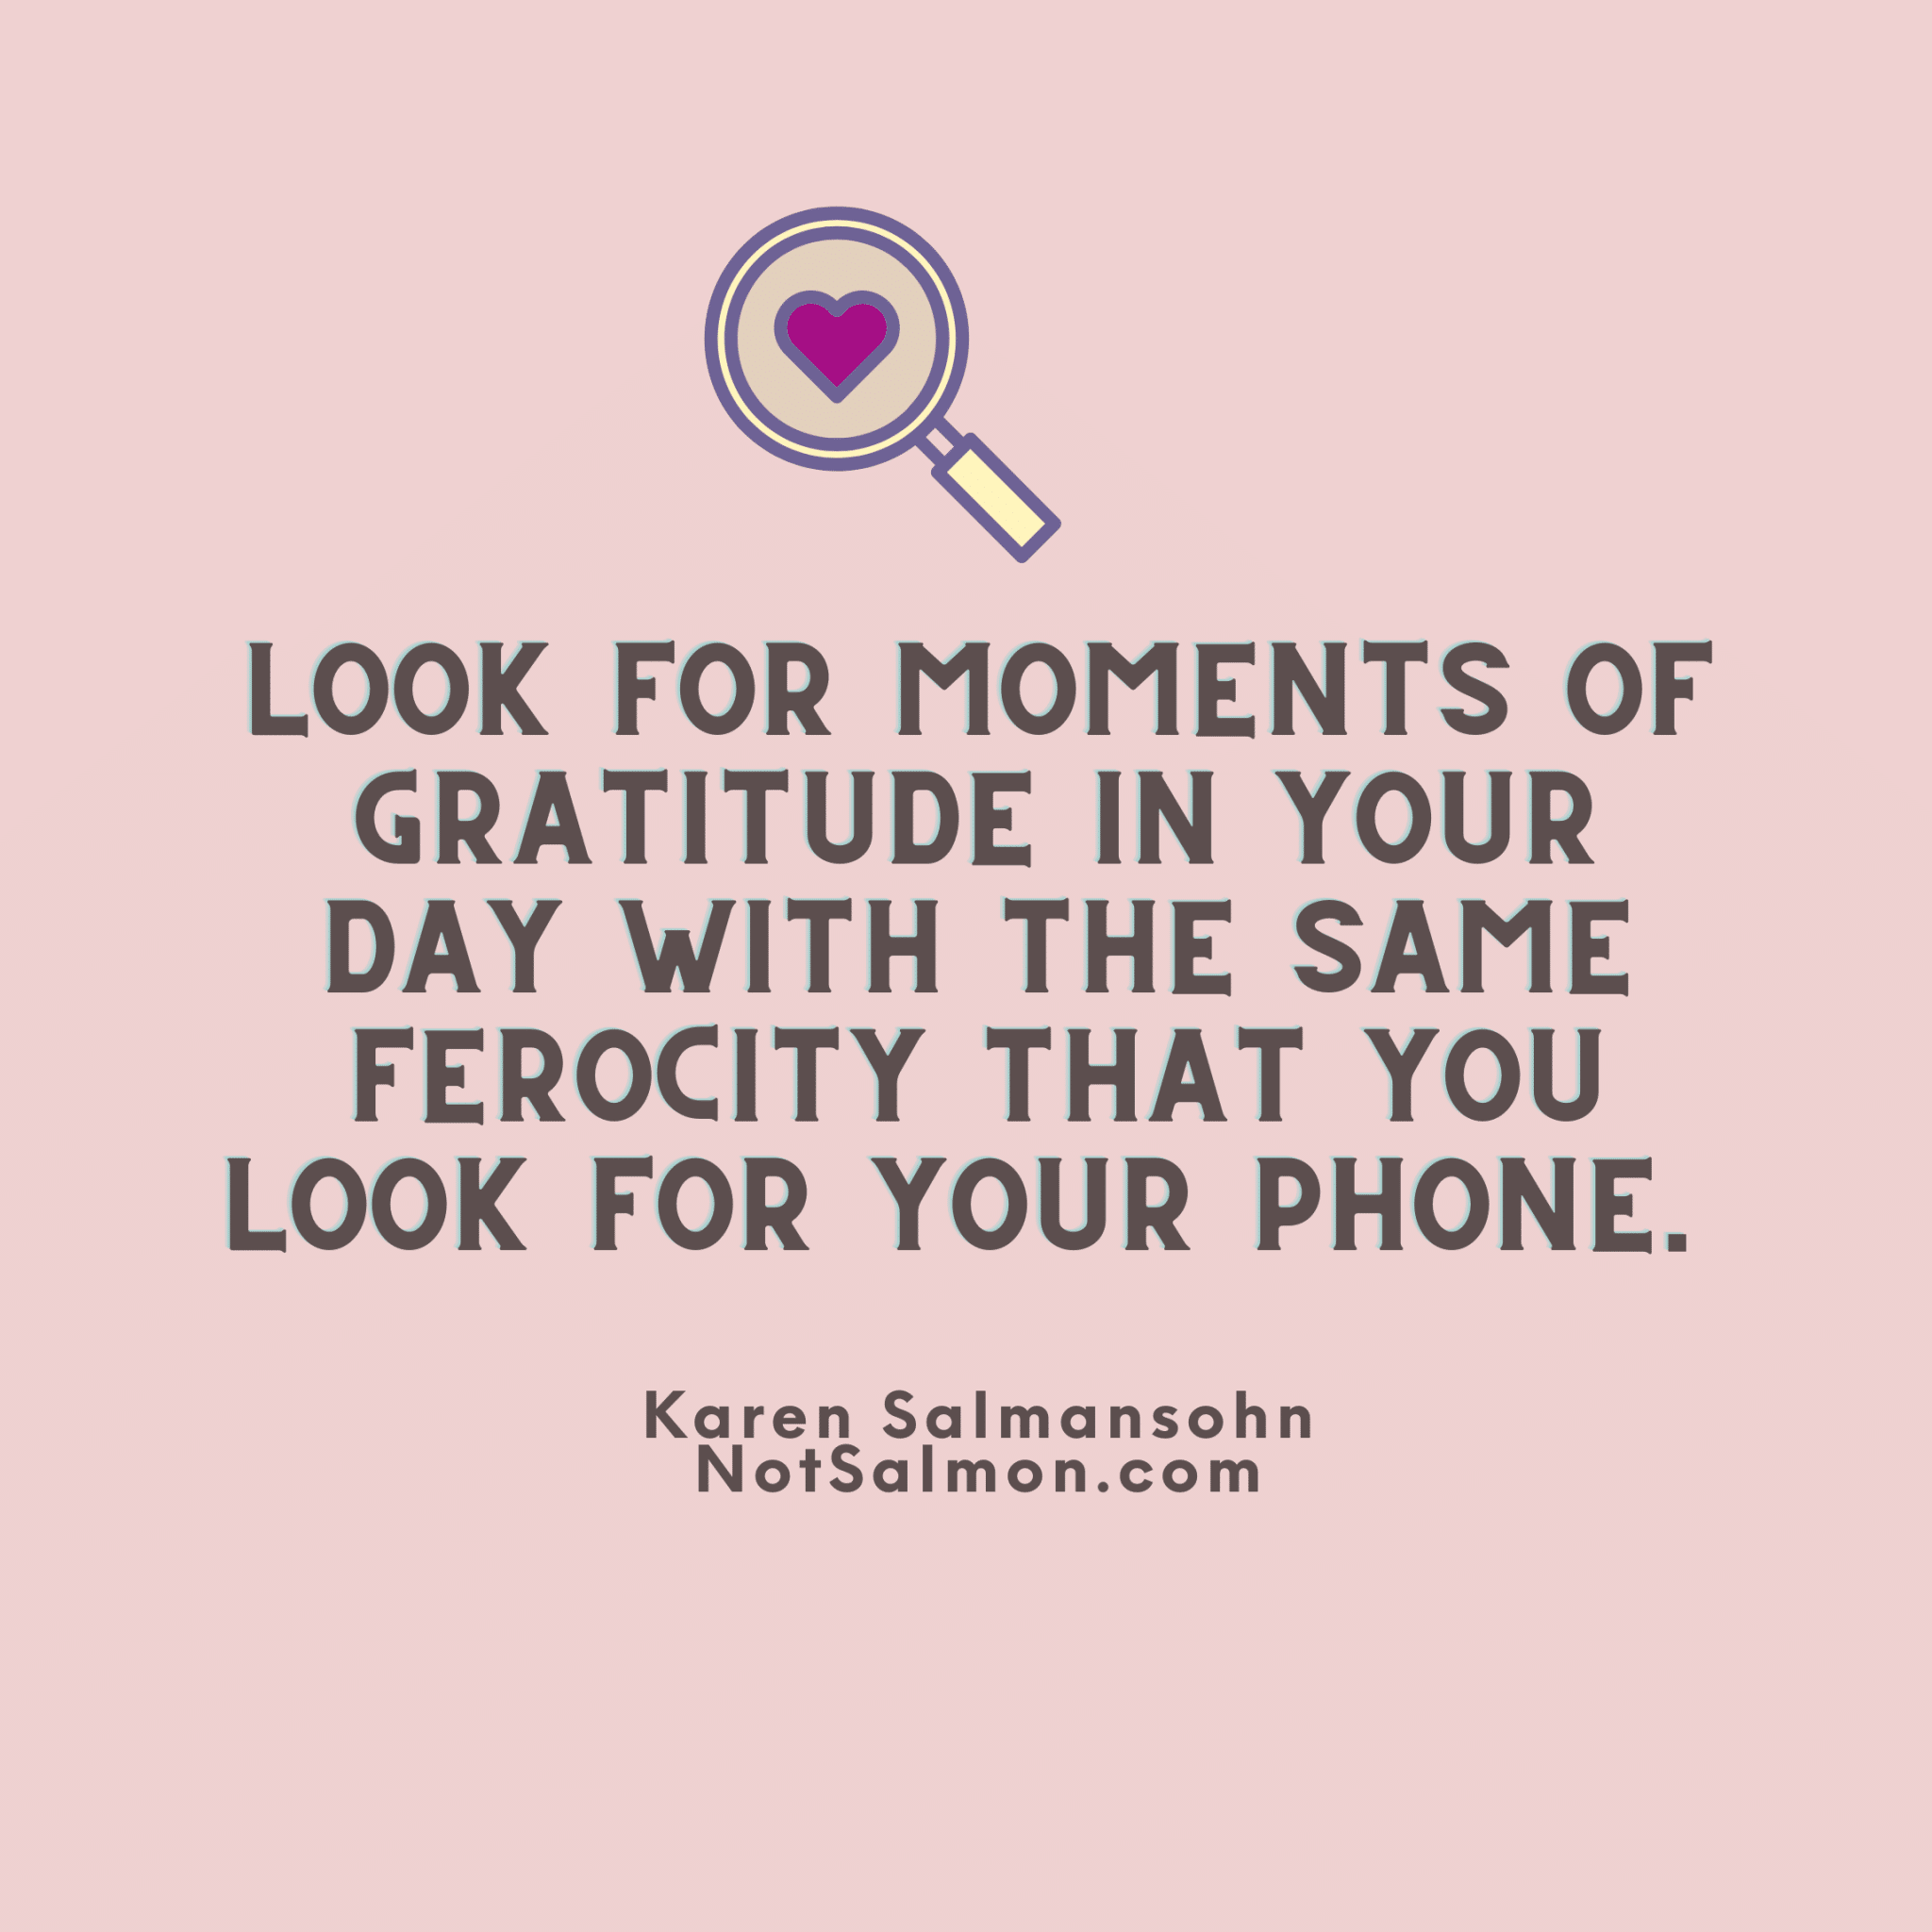 quote look for moments of gratitude in your day with the same ferocity you look for your phone. - karen salmansohn